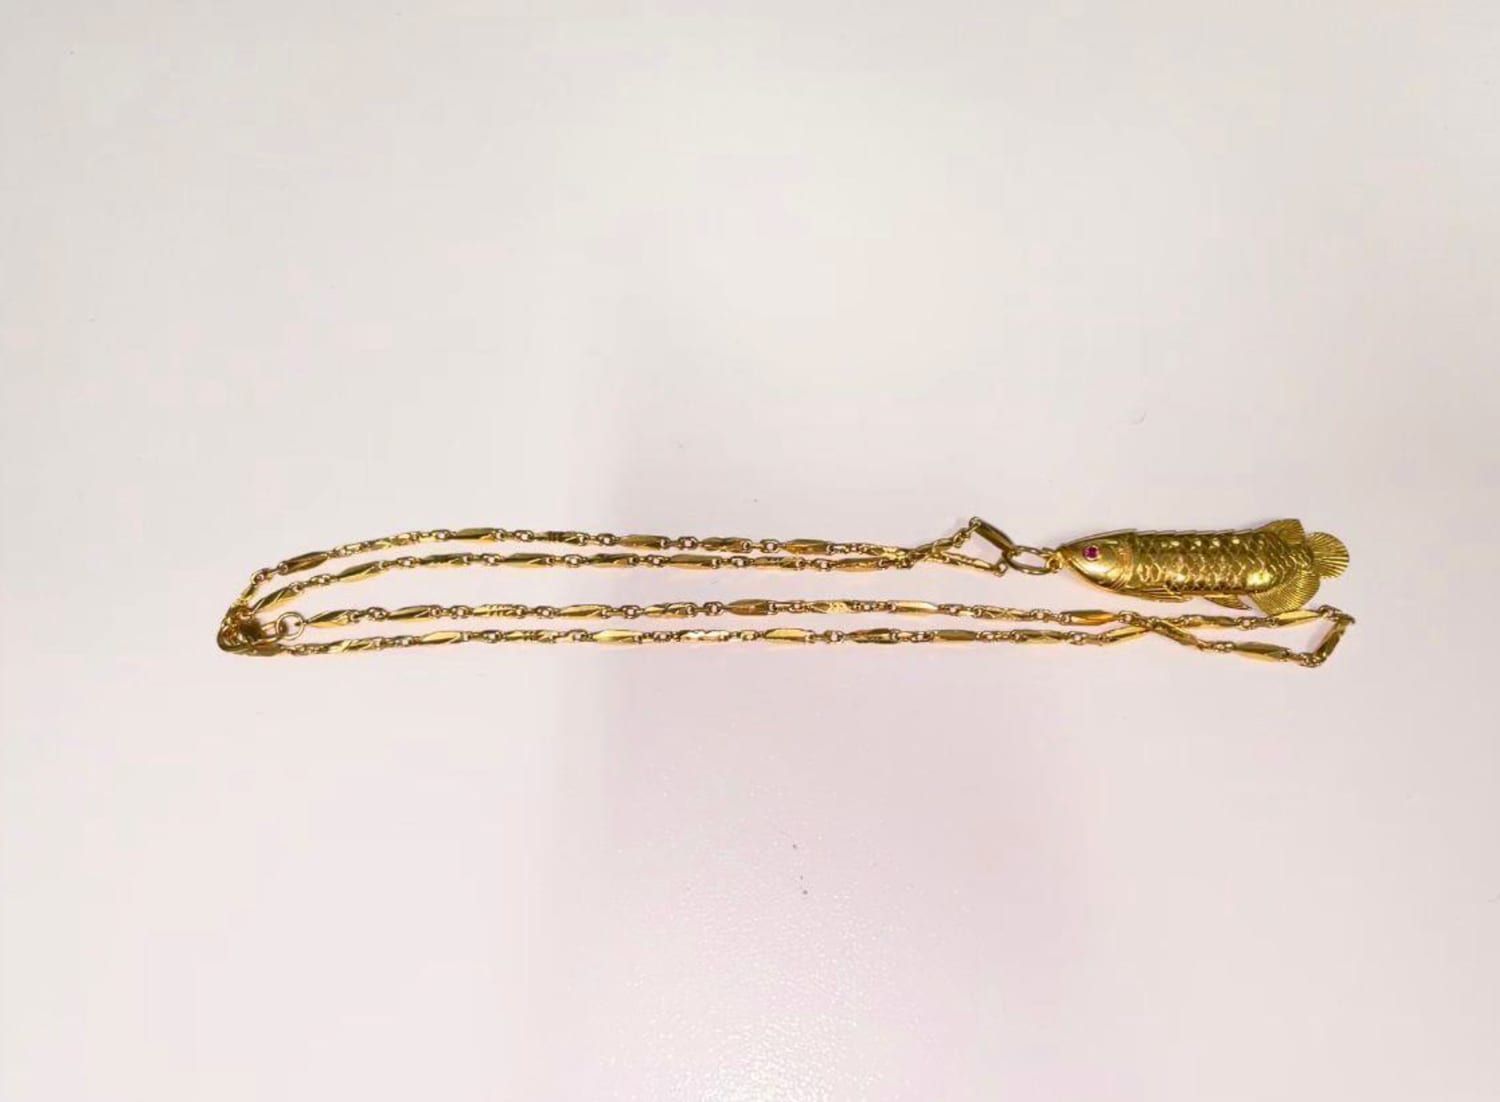 A gold necklace that three youths tried to steal from a 16-year-old at Central Mall on June 6, 2022.